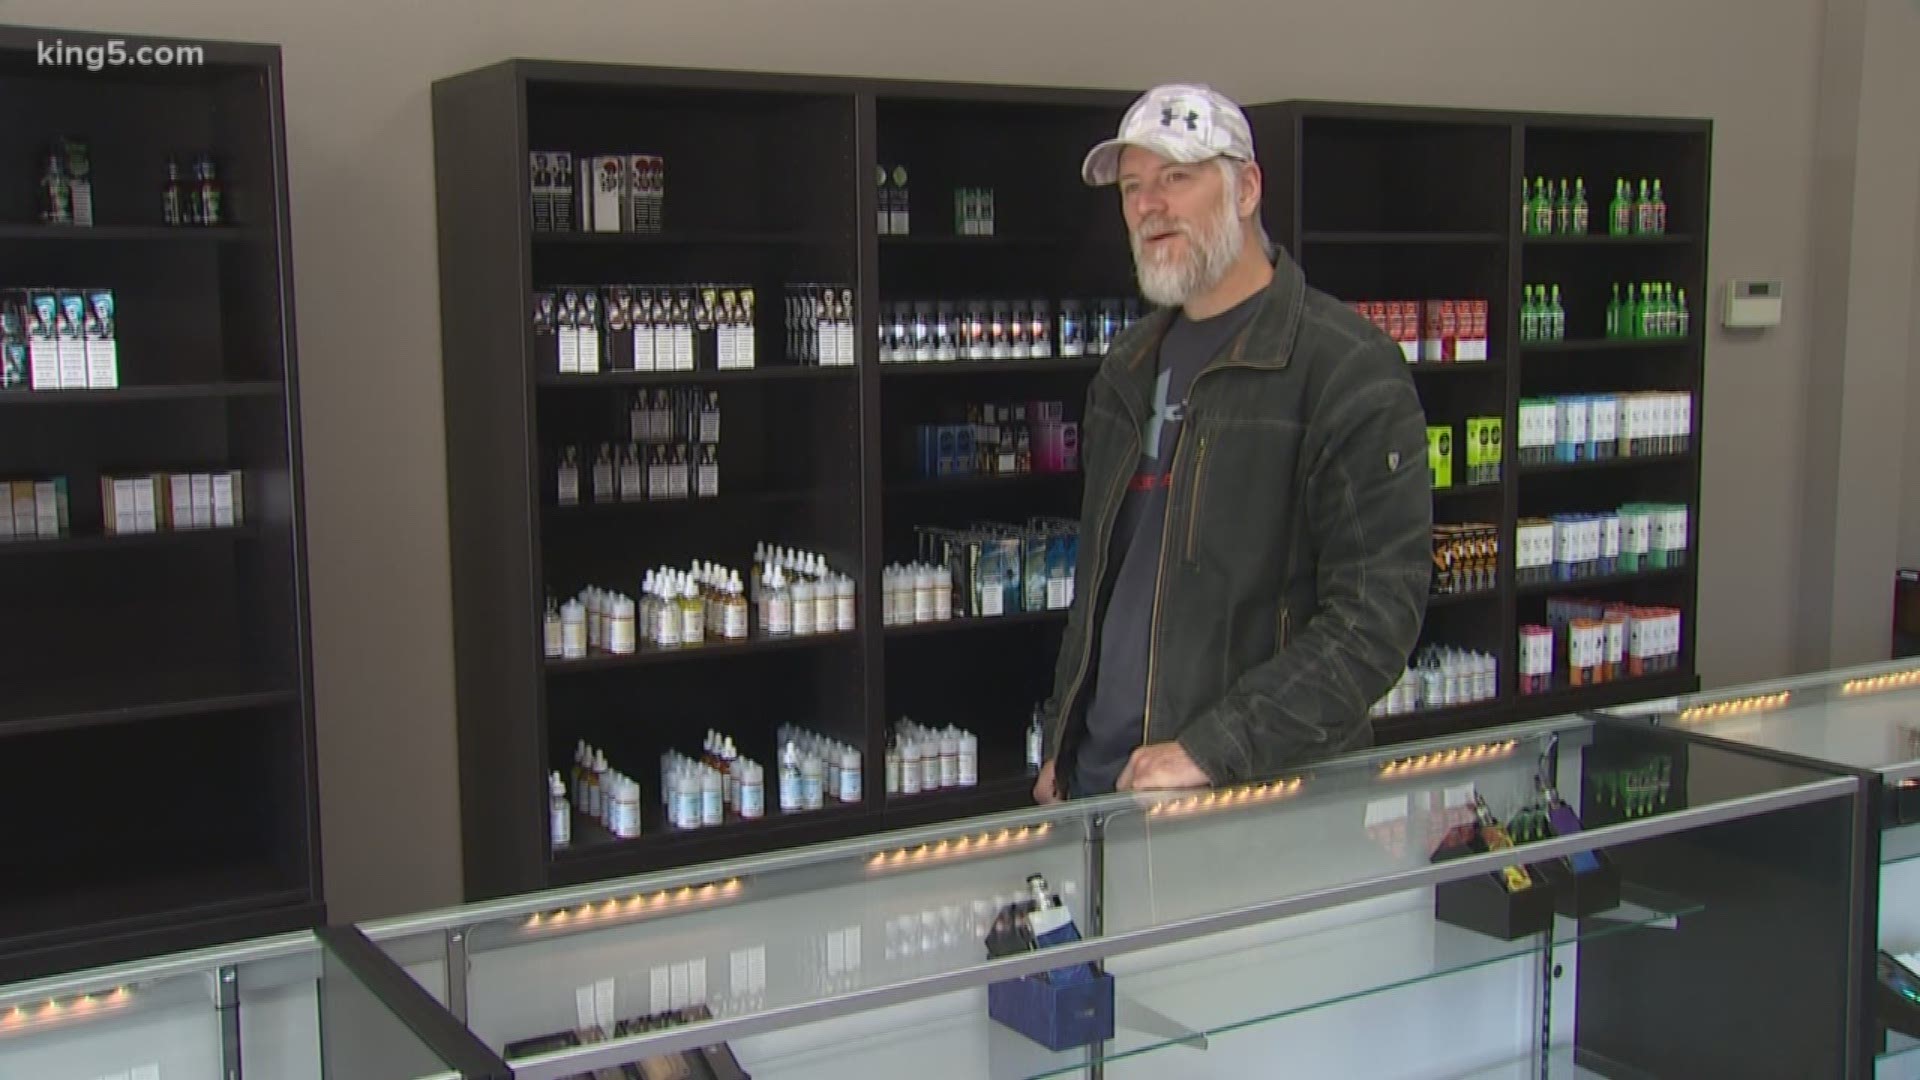 Gov. Inslee's proposed ban on flavored vaping products, plus a new tax approved earlier this year that went into effect Tuesday has vape store owners worried.